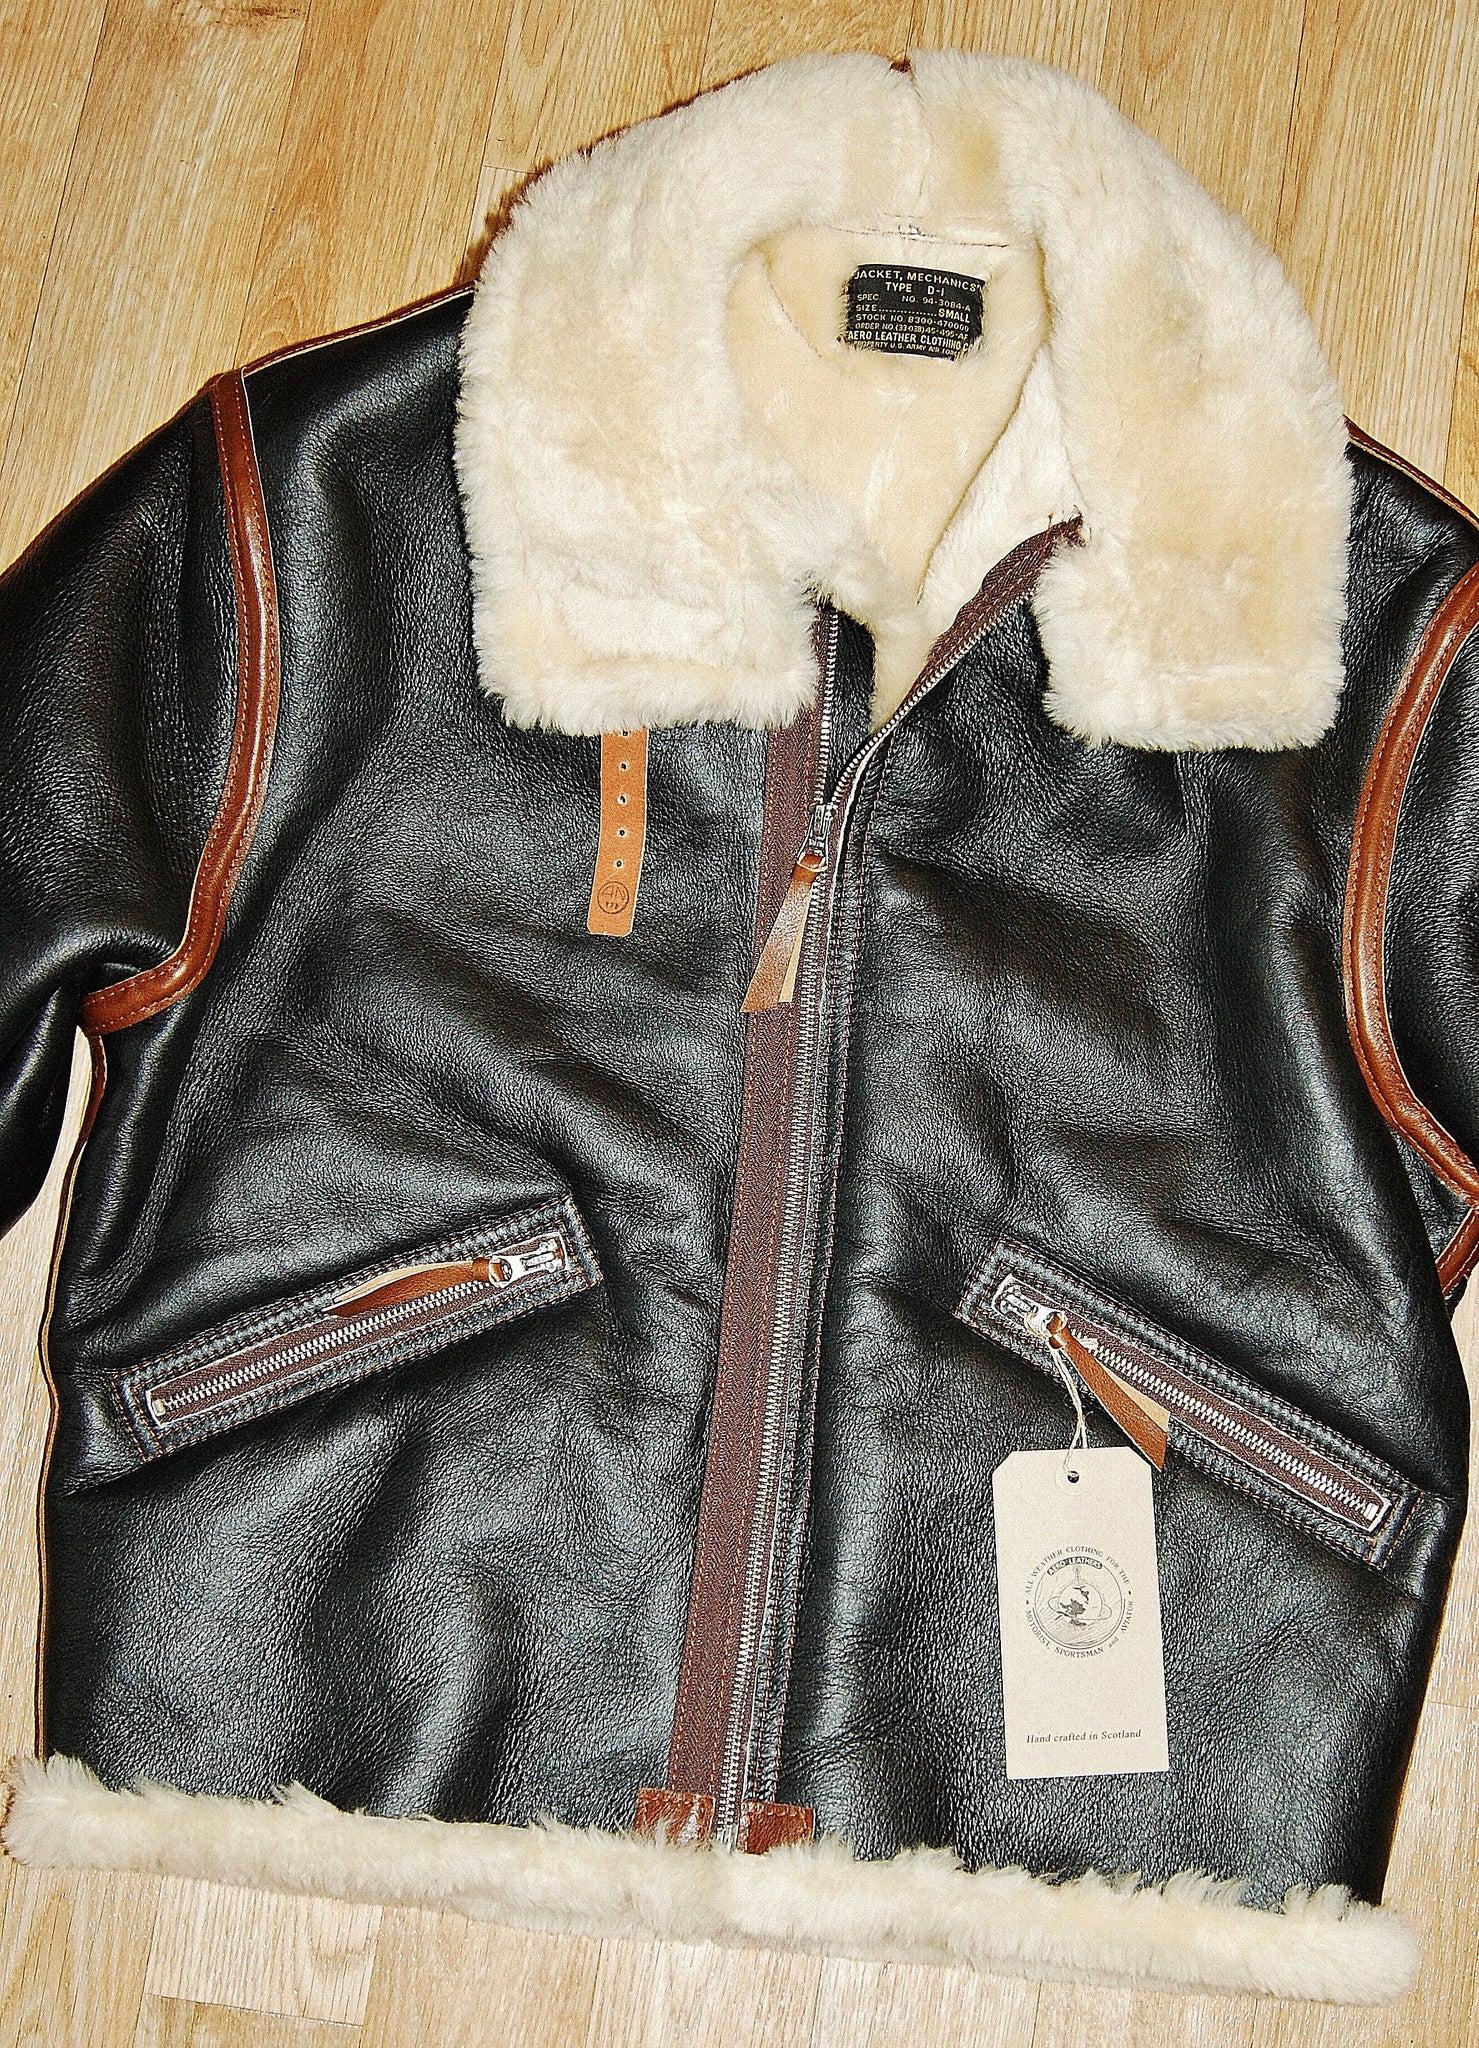 Aero Two-Tone D-1 Military Flight Jacket, size 38, Seal Brown with Russet Vicenza Horsehide Trim